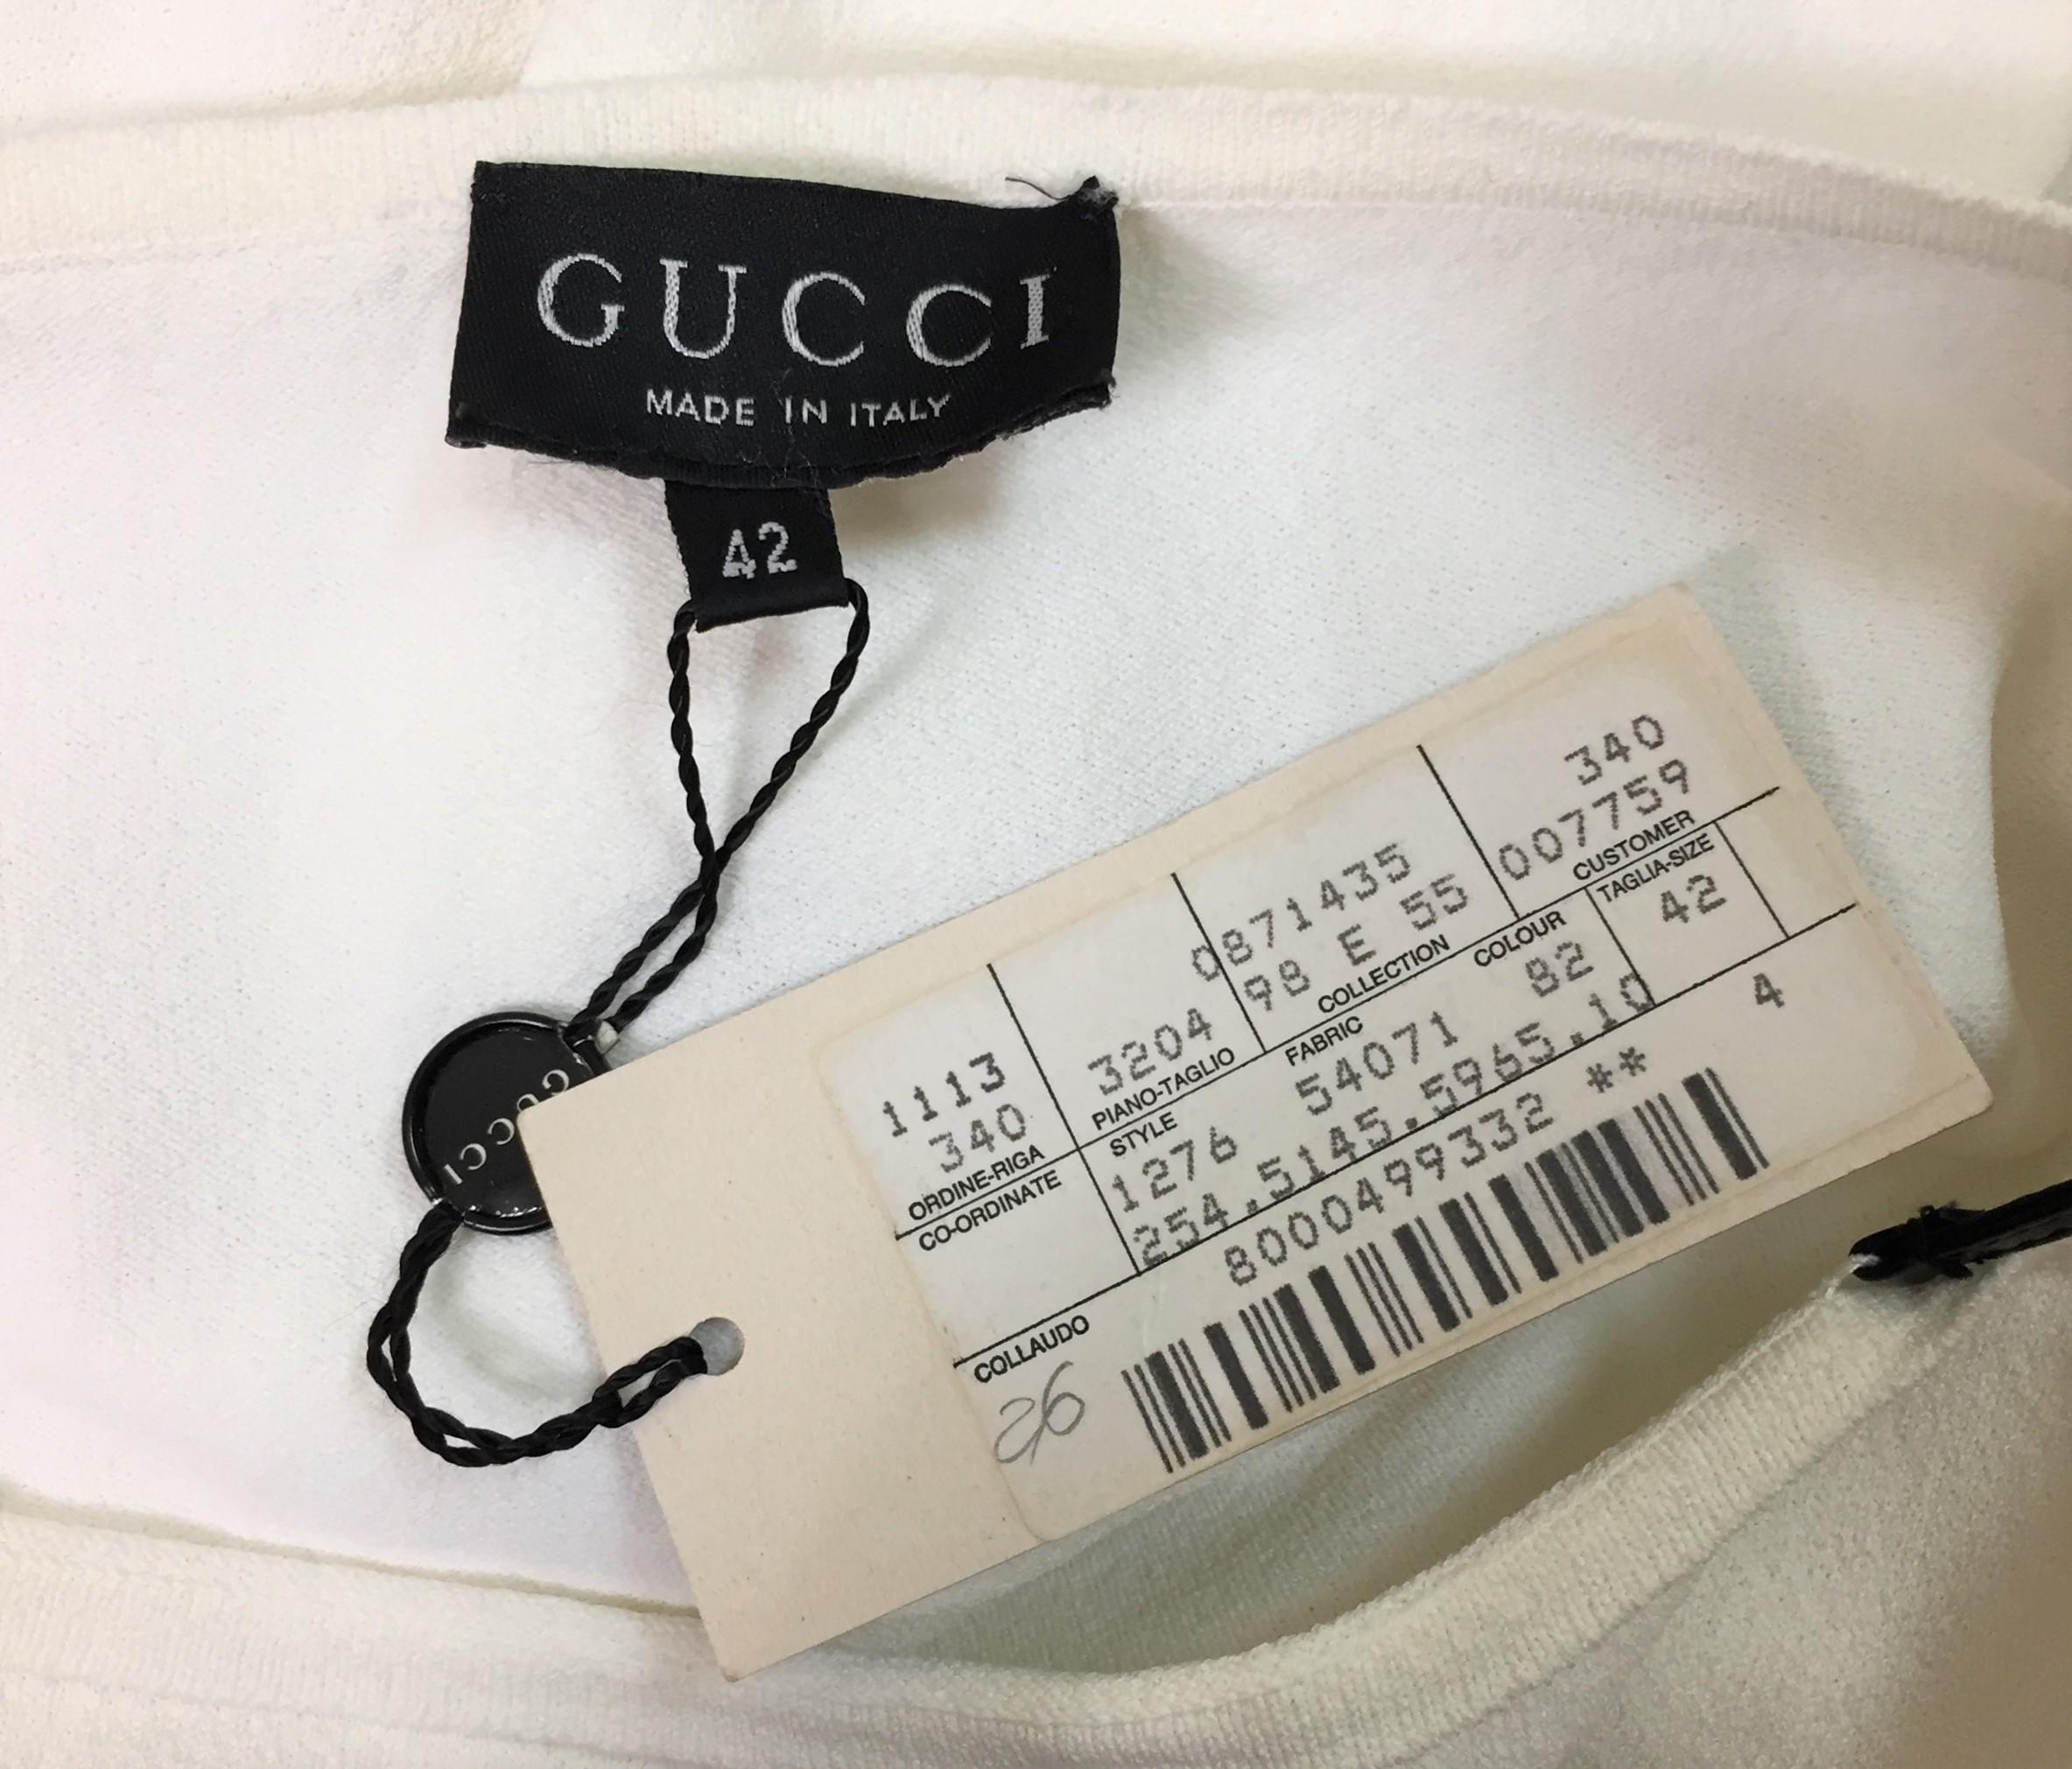 NWT S/S 1998 Gucci by Tom Ford Semi-Sheer White Bodycon Wiggle Dress ...